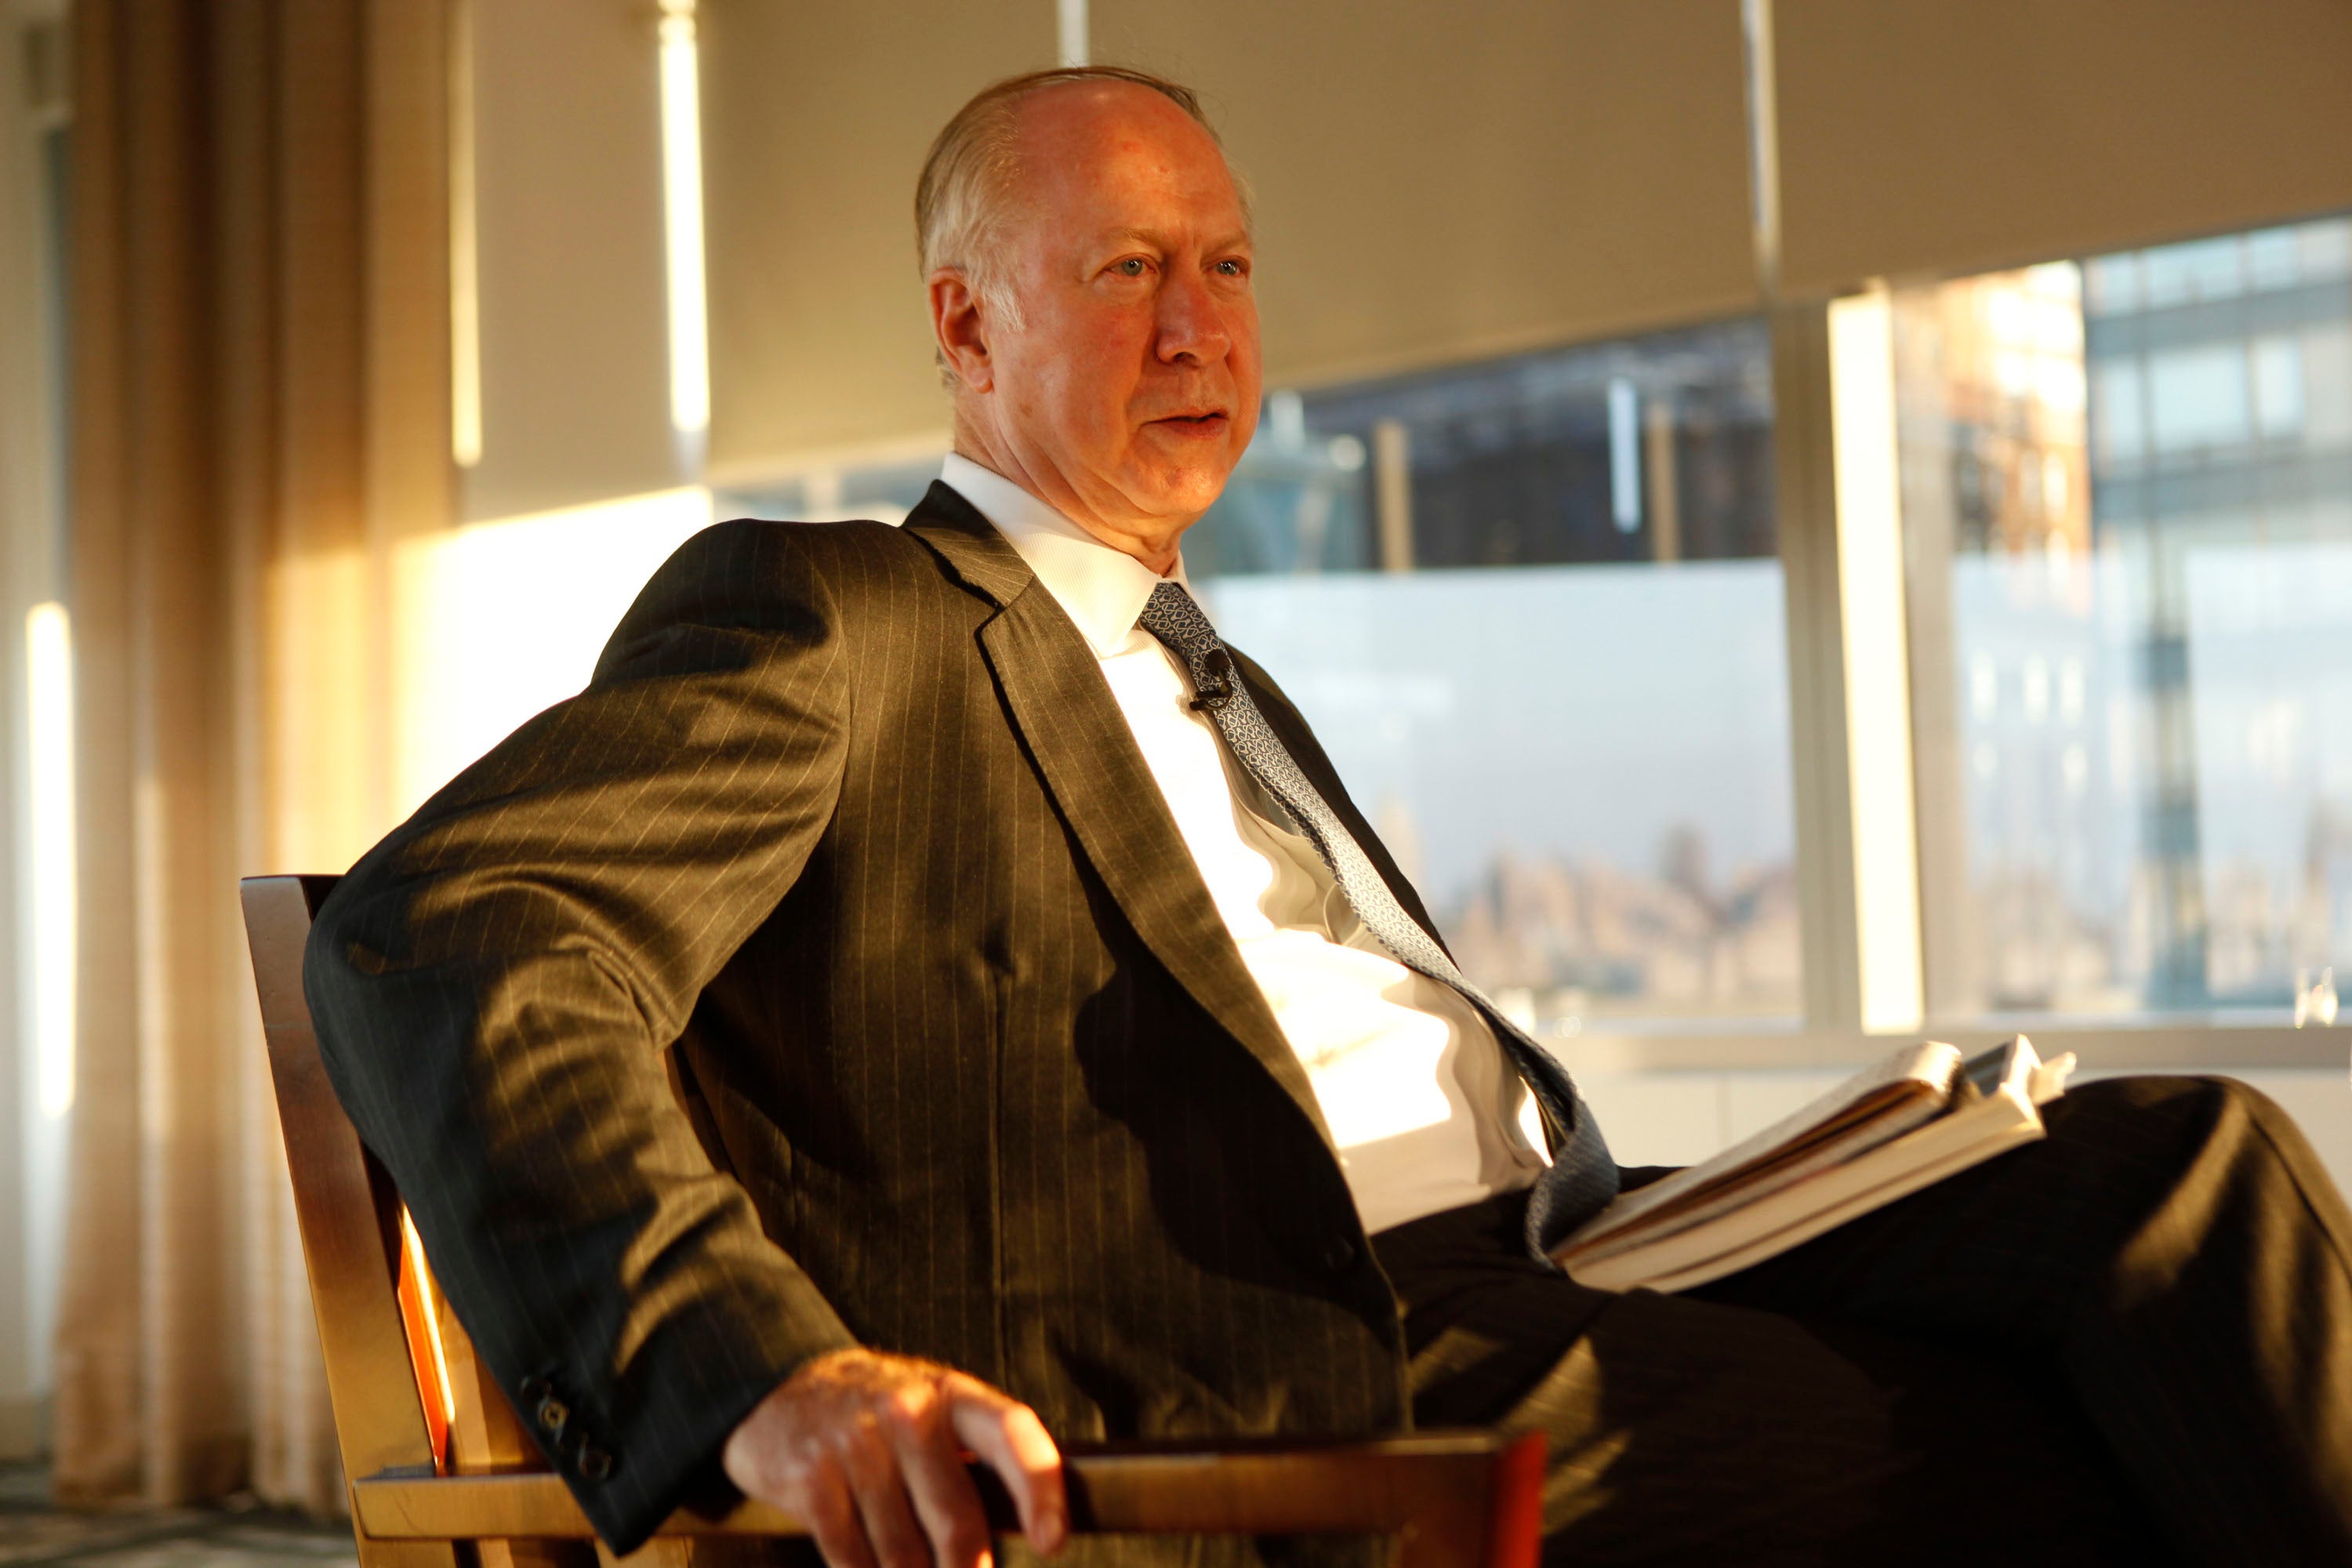 Gergen, wearing a suit, is seated in a chair in a sunny room.